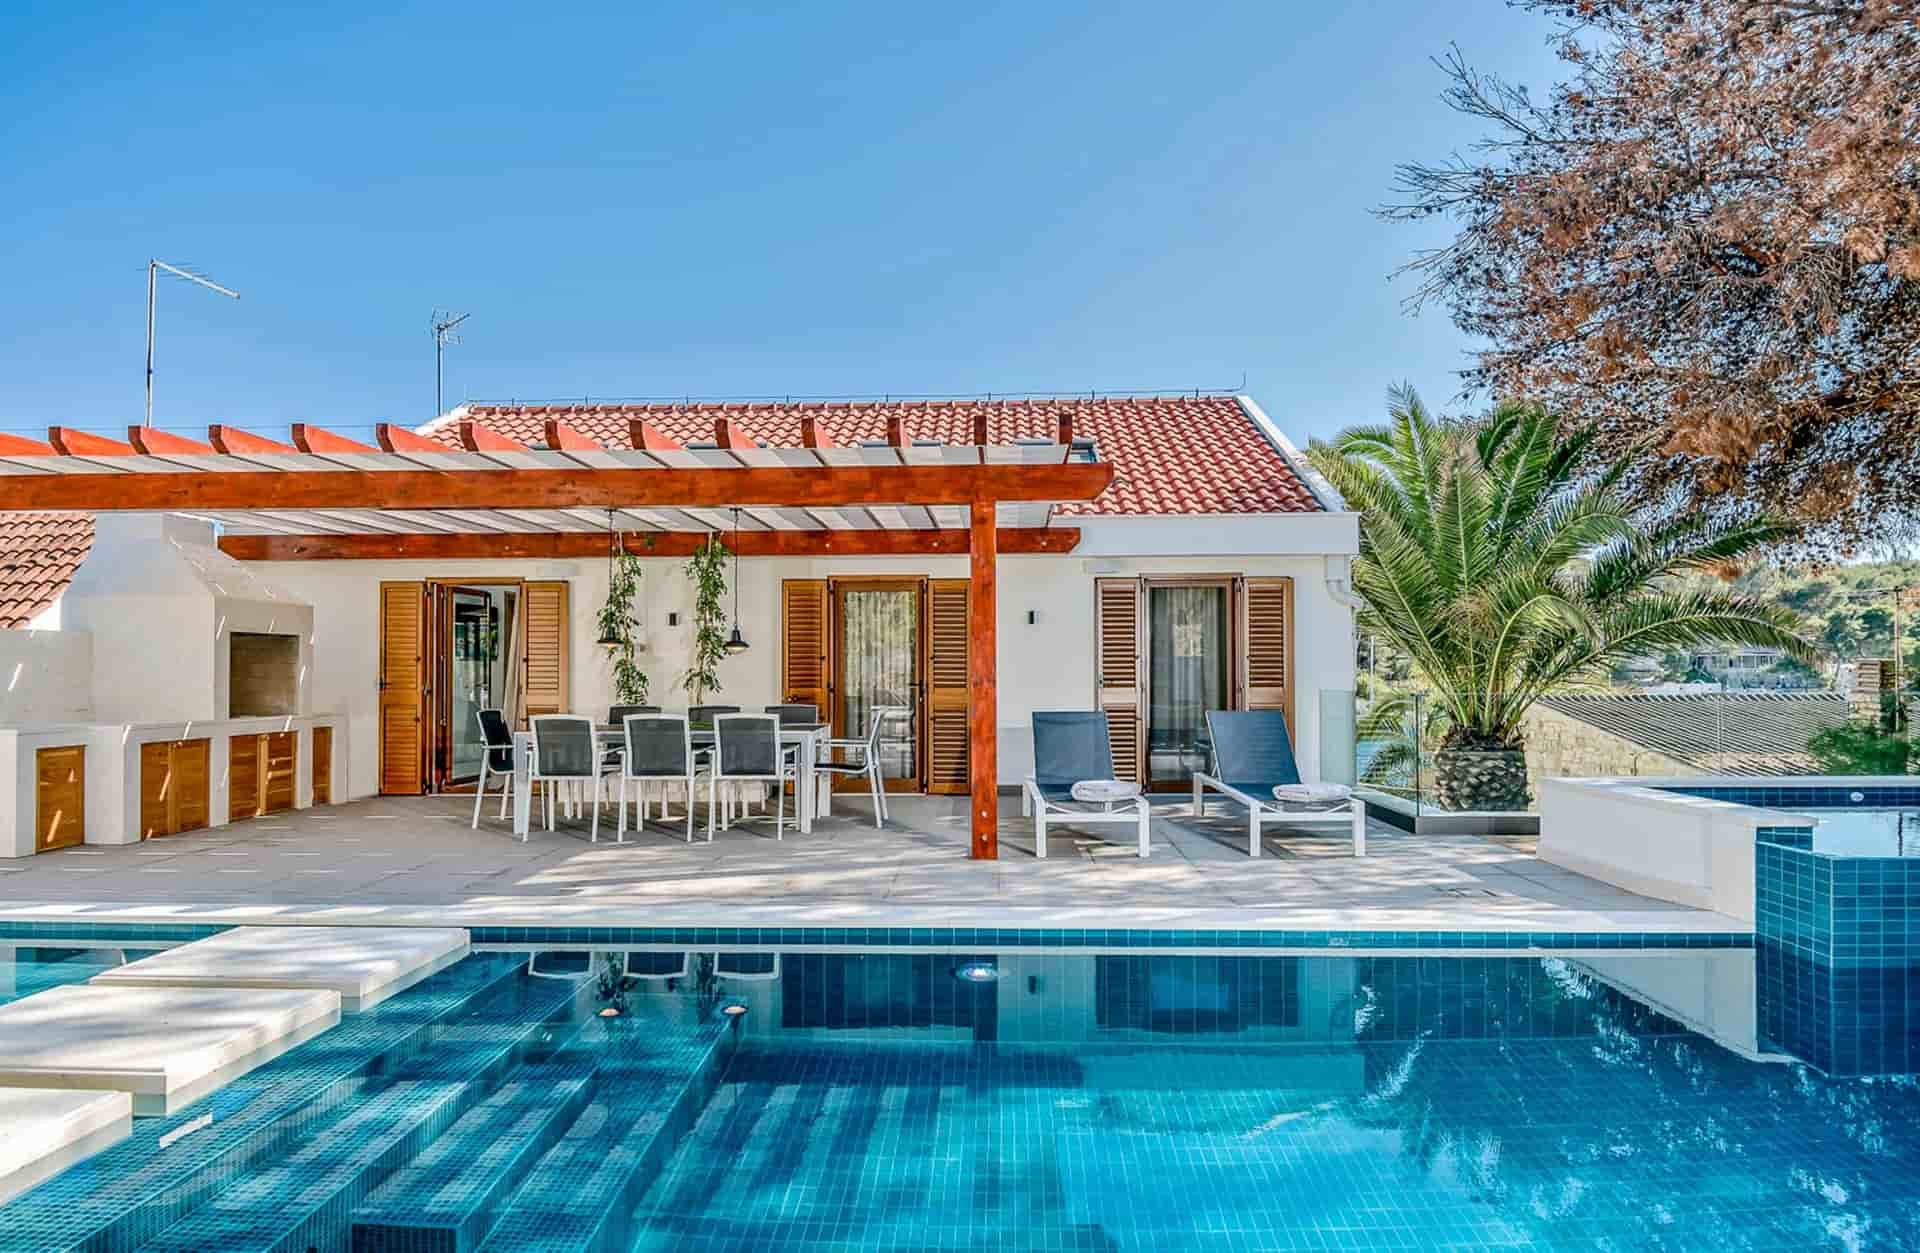 Villa with pool, just few steps from the sea